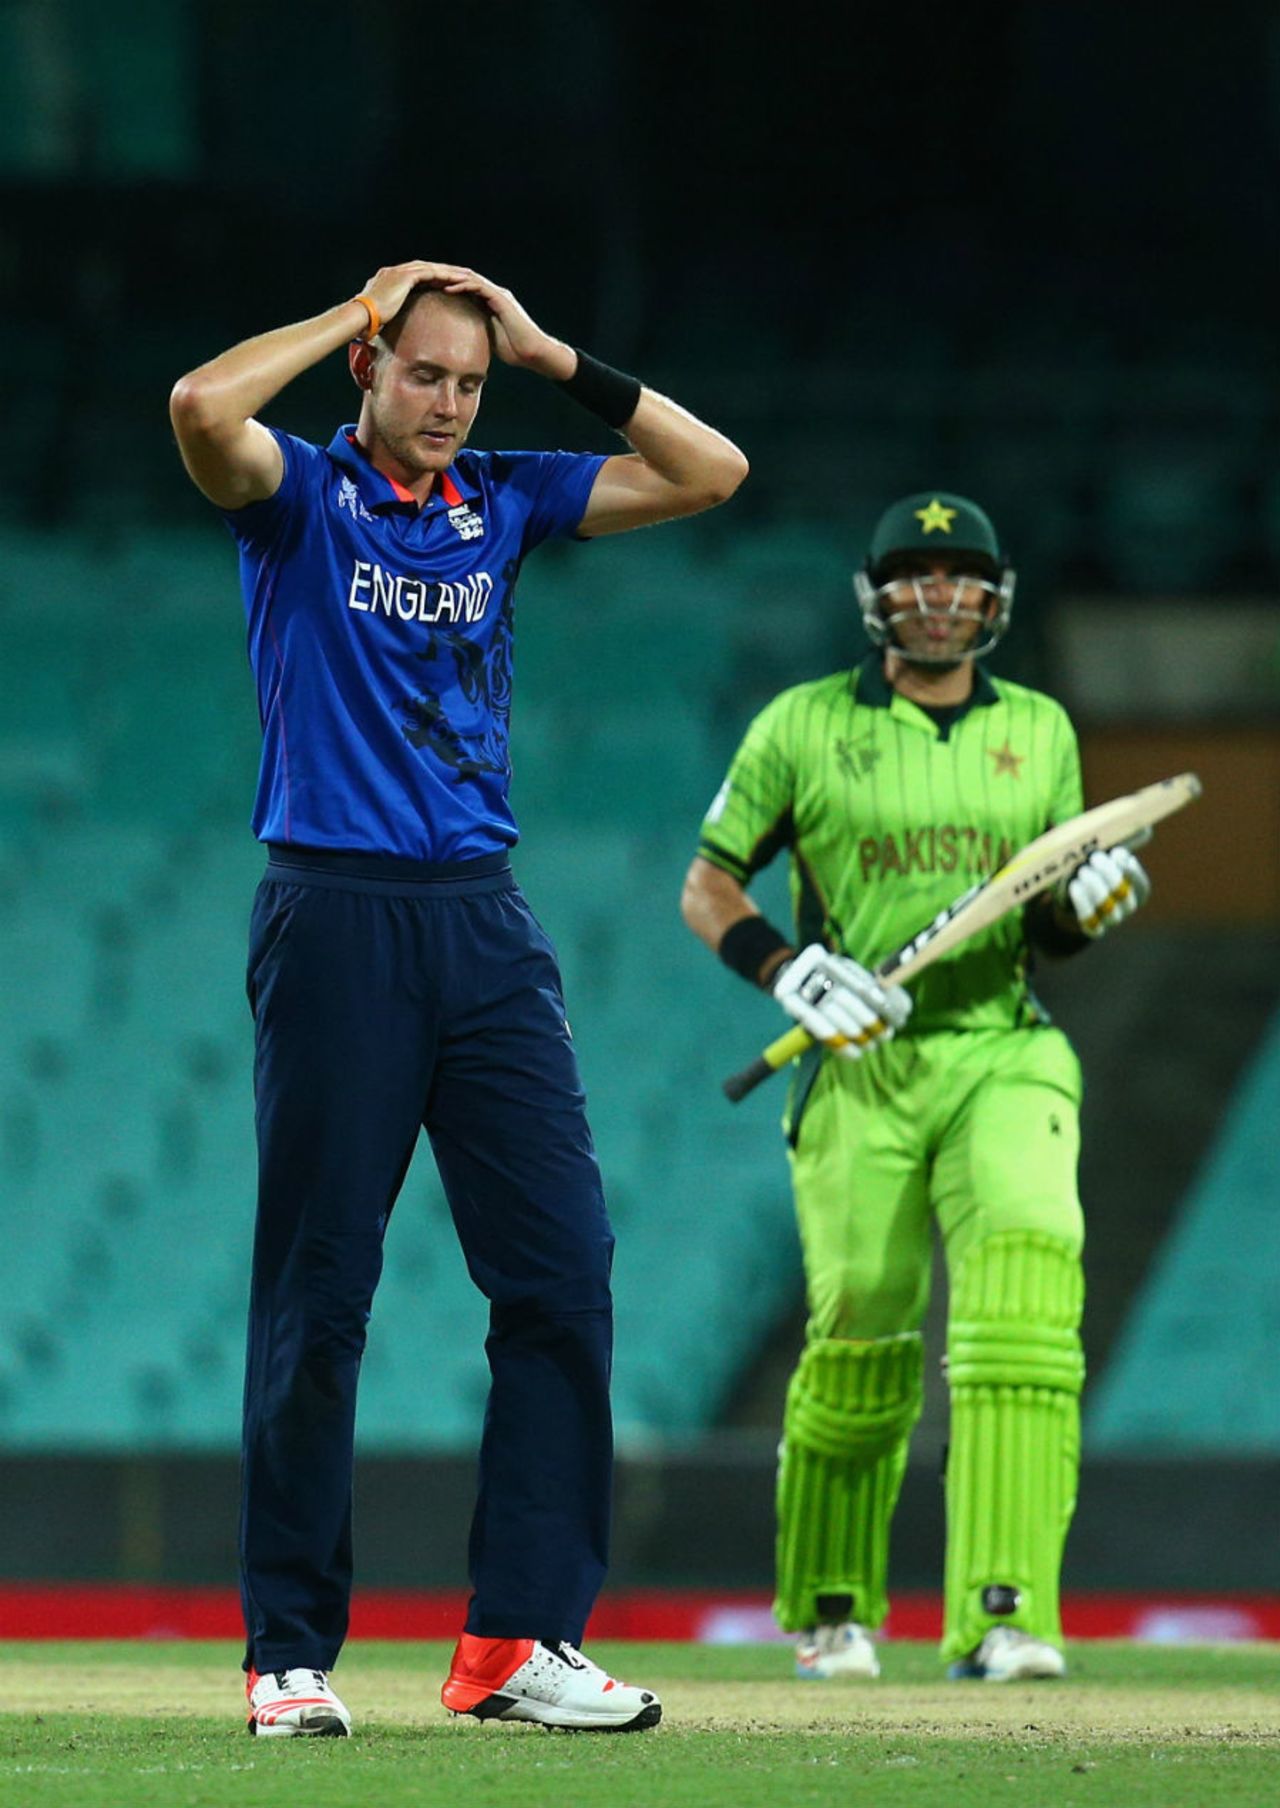 Stuart Broad and England couldn't find their way past Misbah-ul-Haq, England v Pakistan, World Cup warm-up, Sydney, February 11, 2015